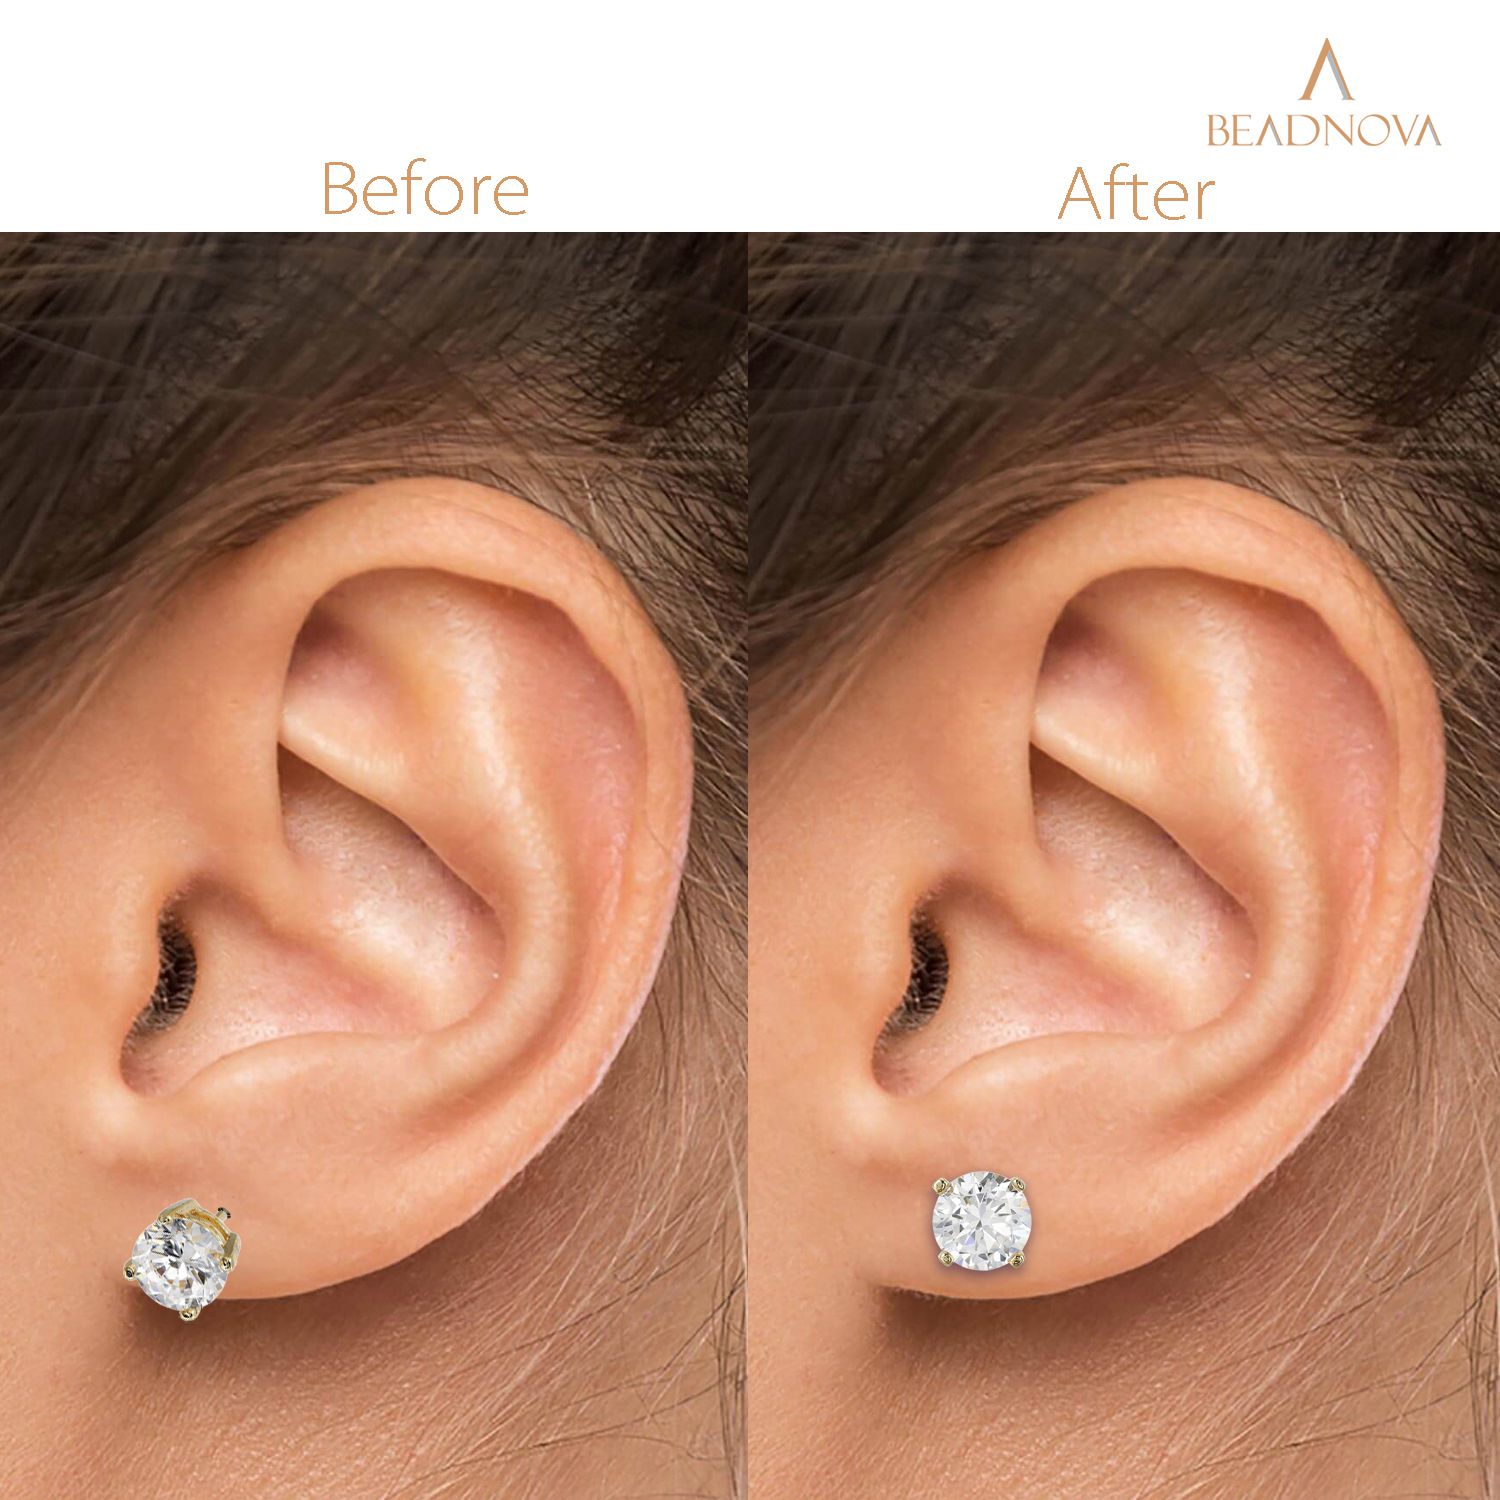 soft silicone earring backs for studs| Alibaba.com